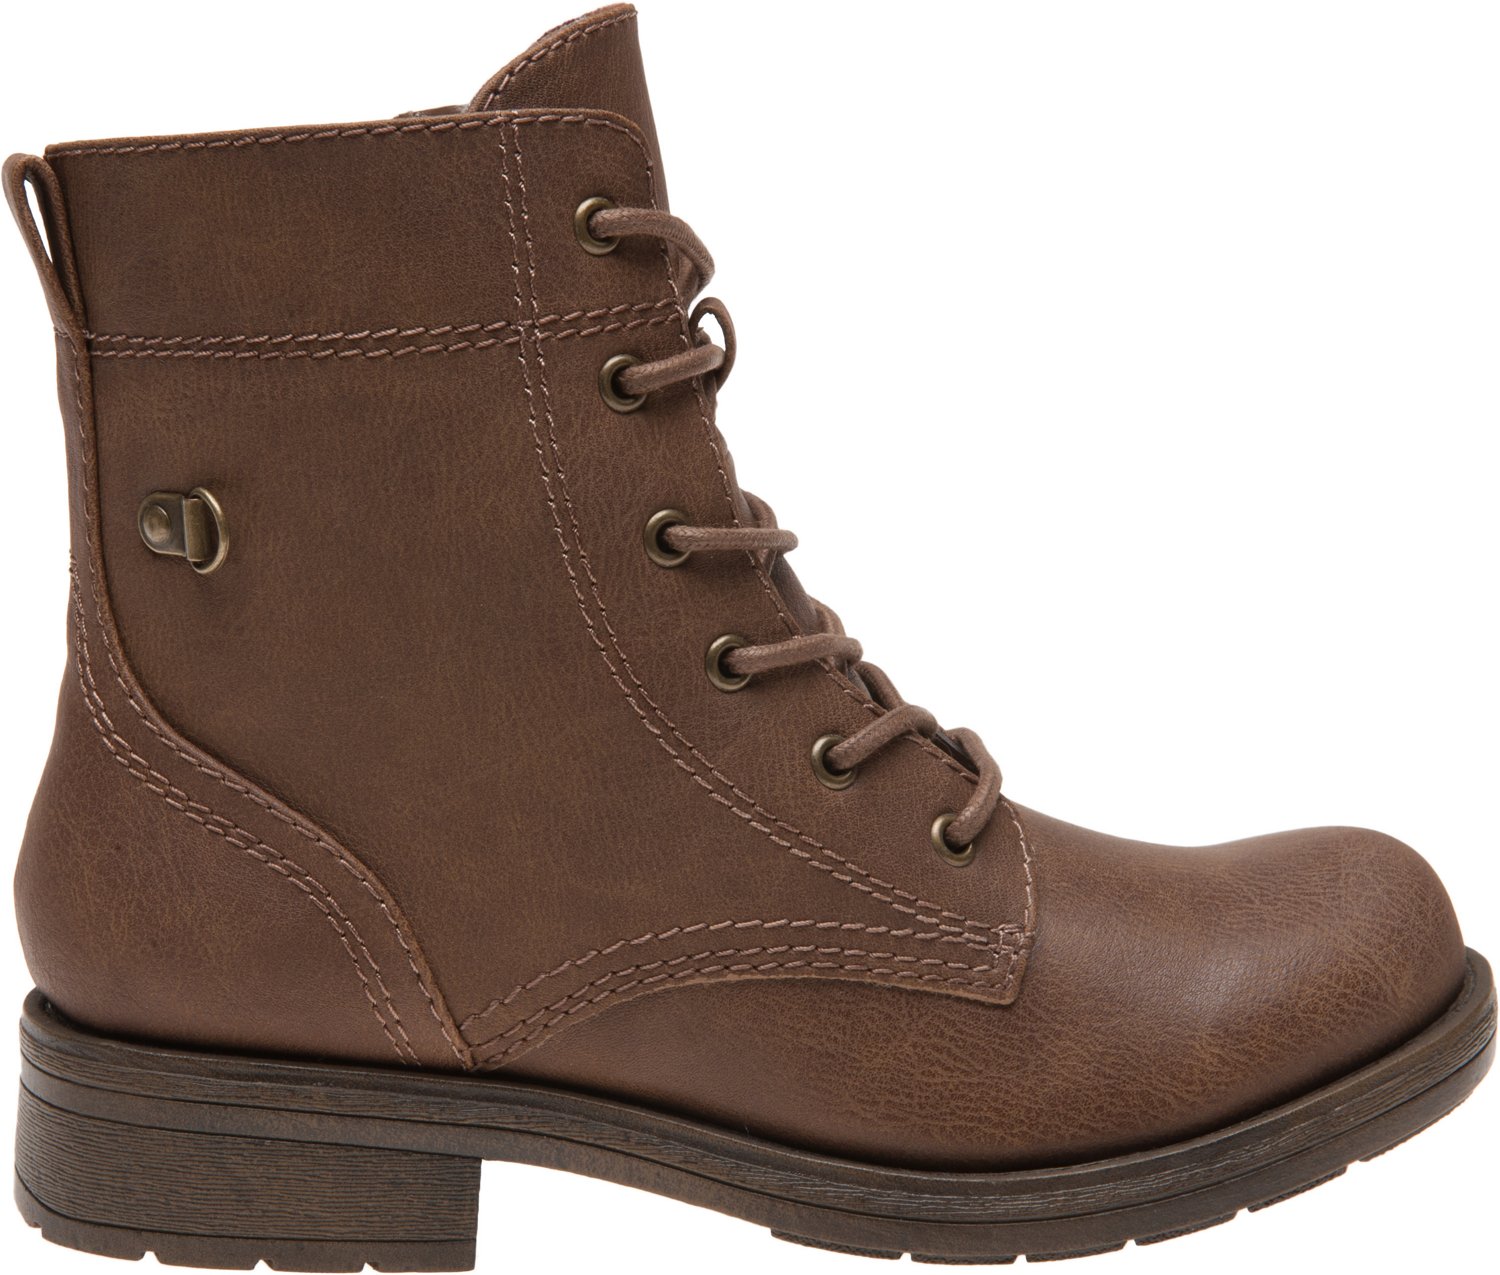 Academy - Women's Casual Boots